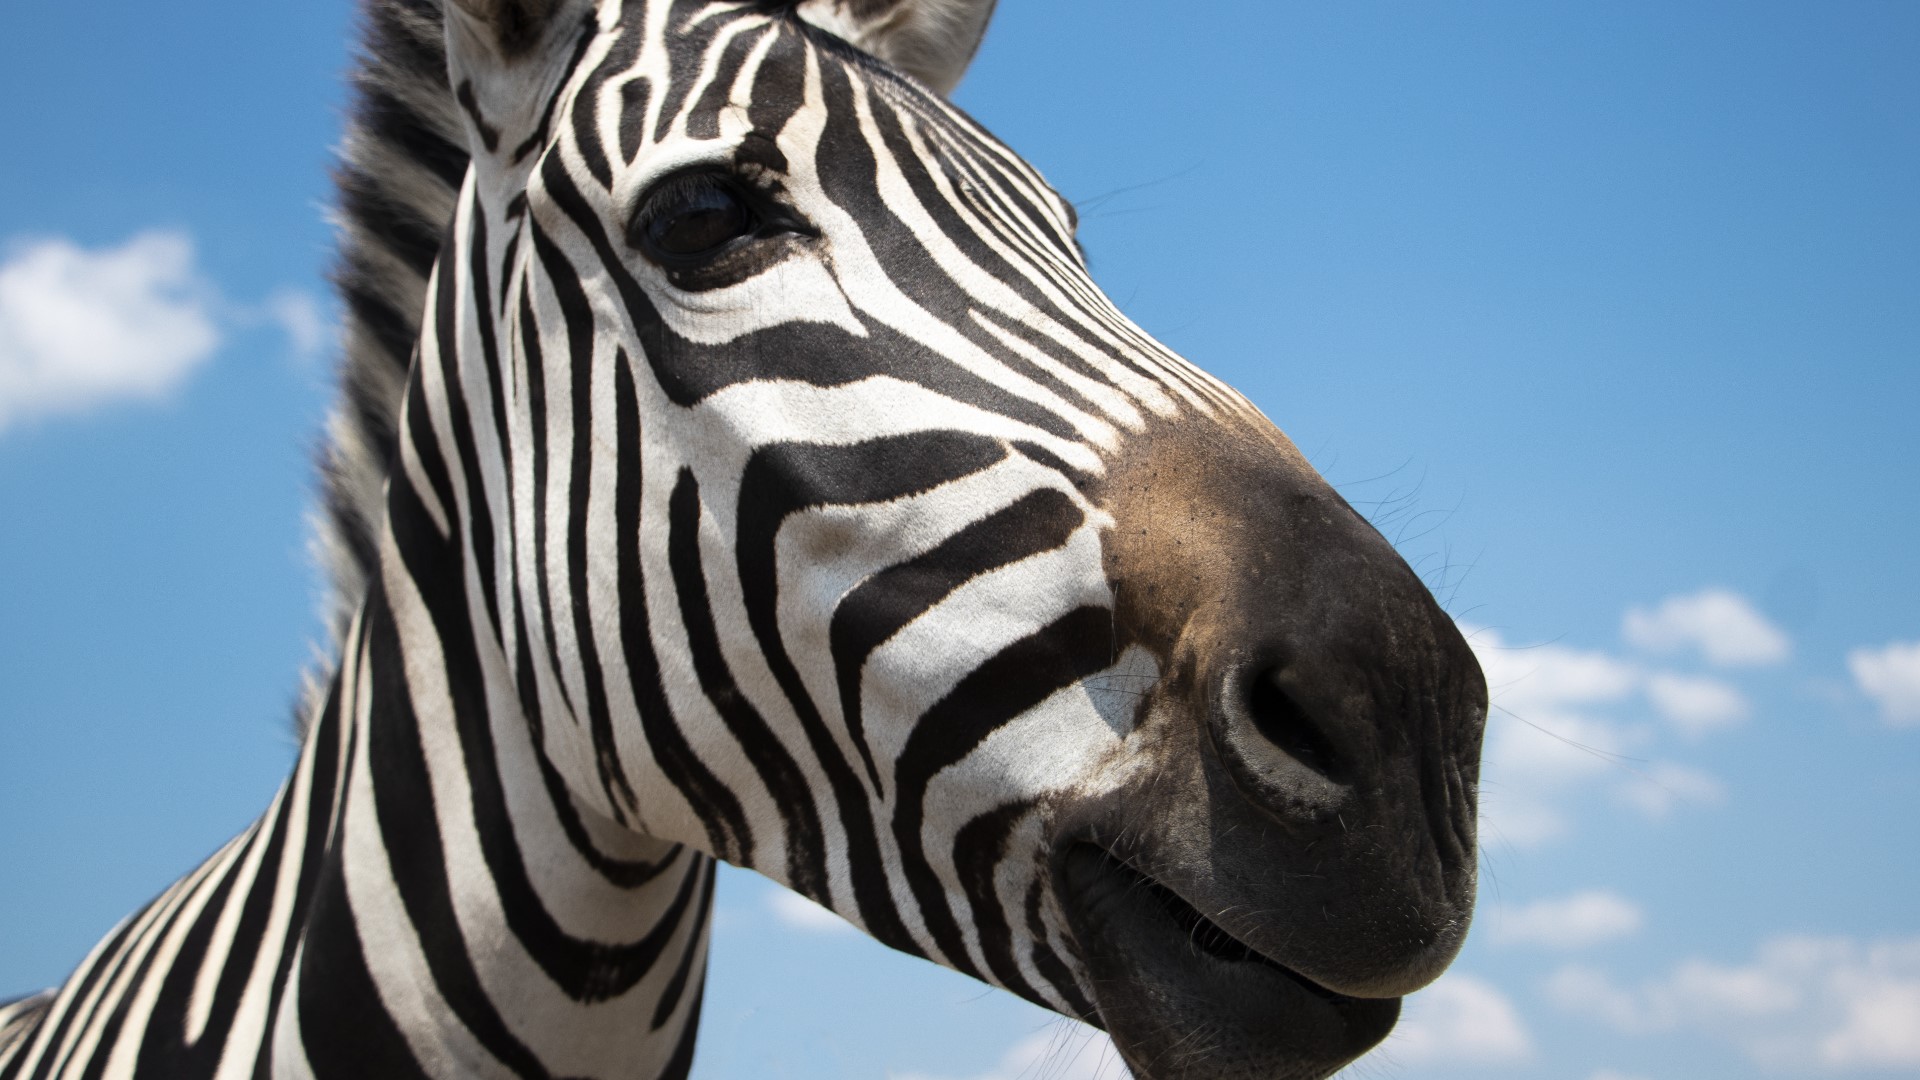 Can the Zebras on the loose make it through winter?